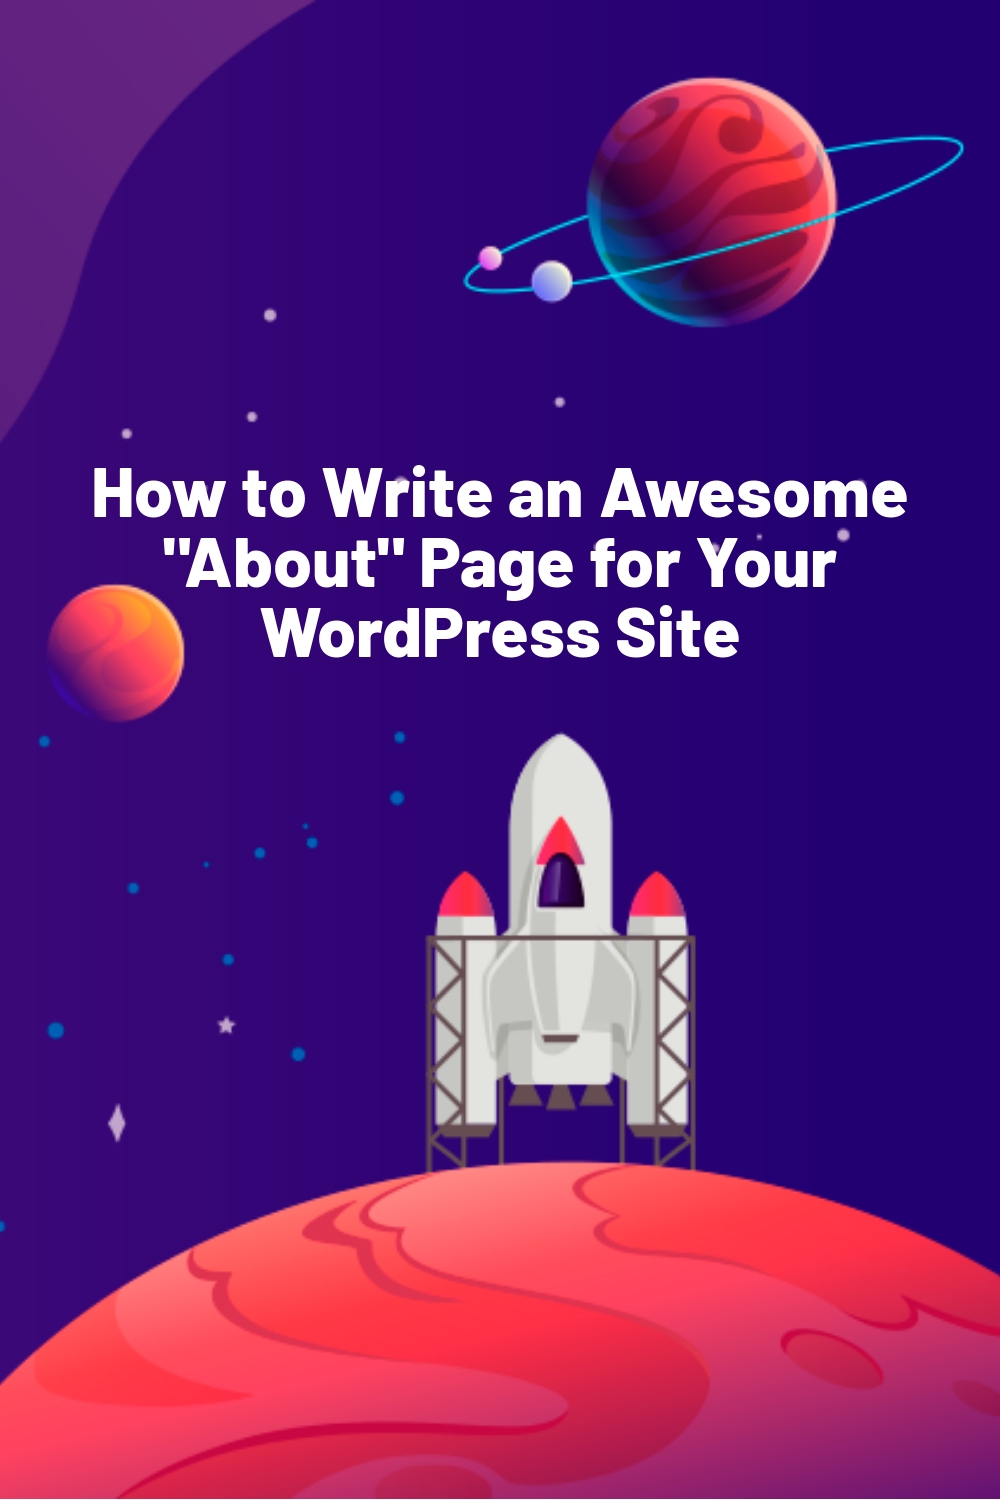 How to Write an Awesome “About” Page for Your WordPress Site